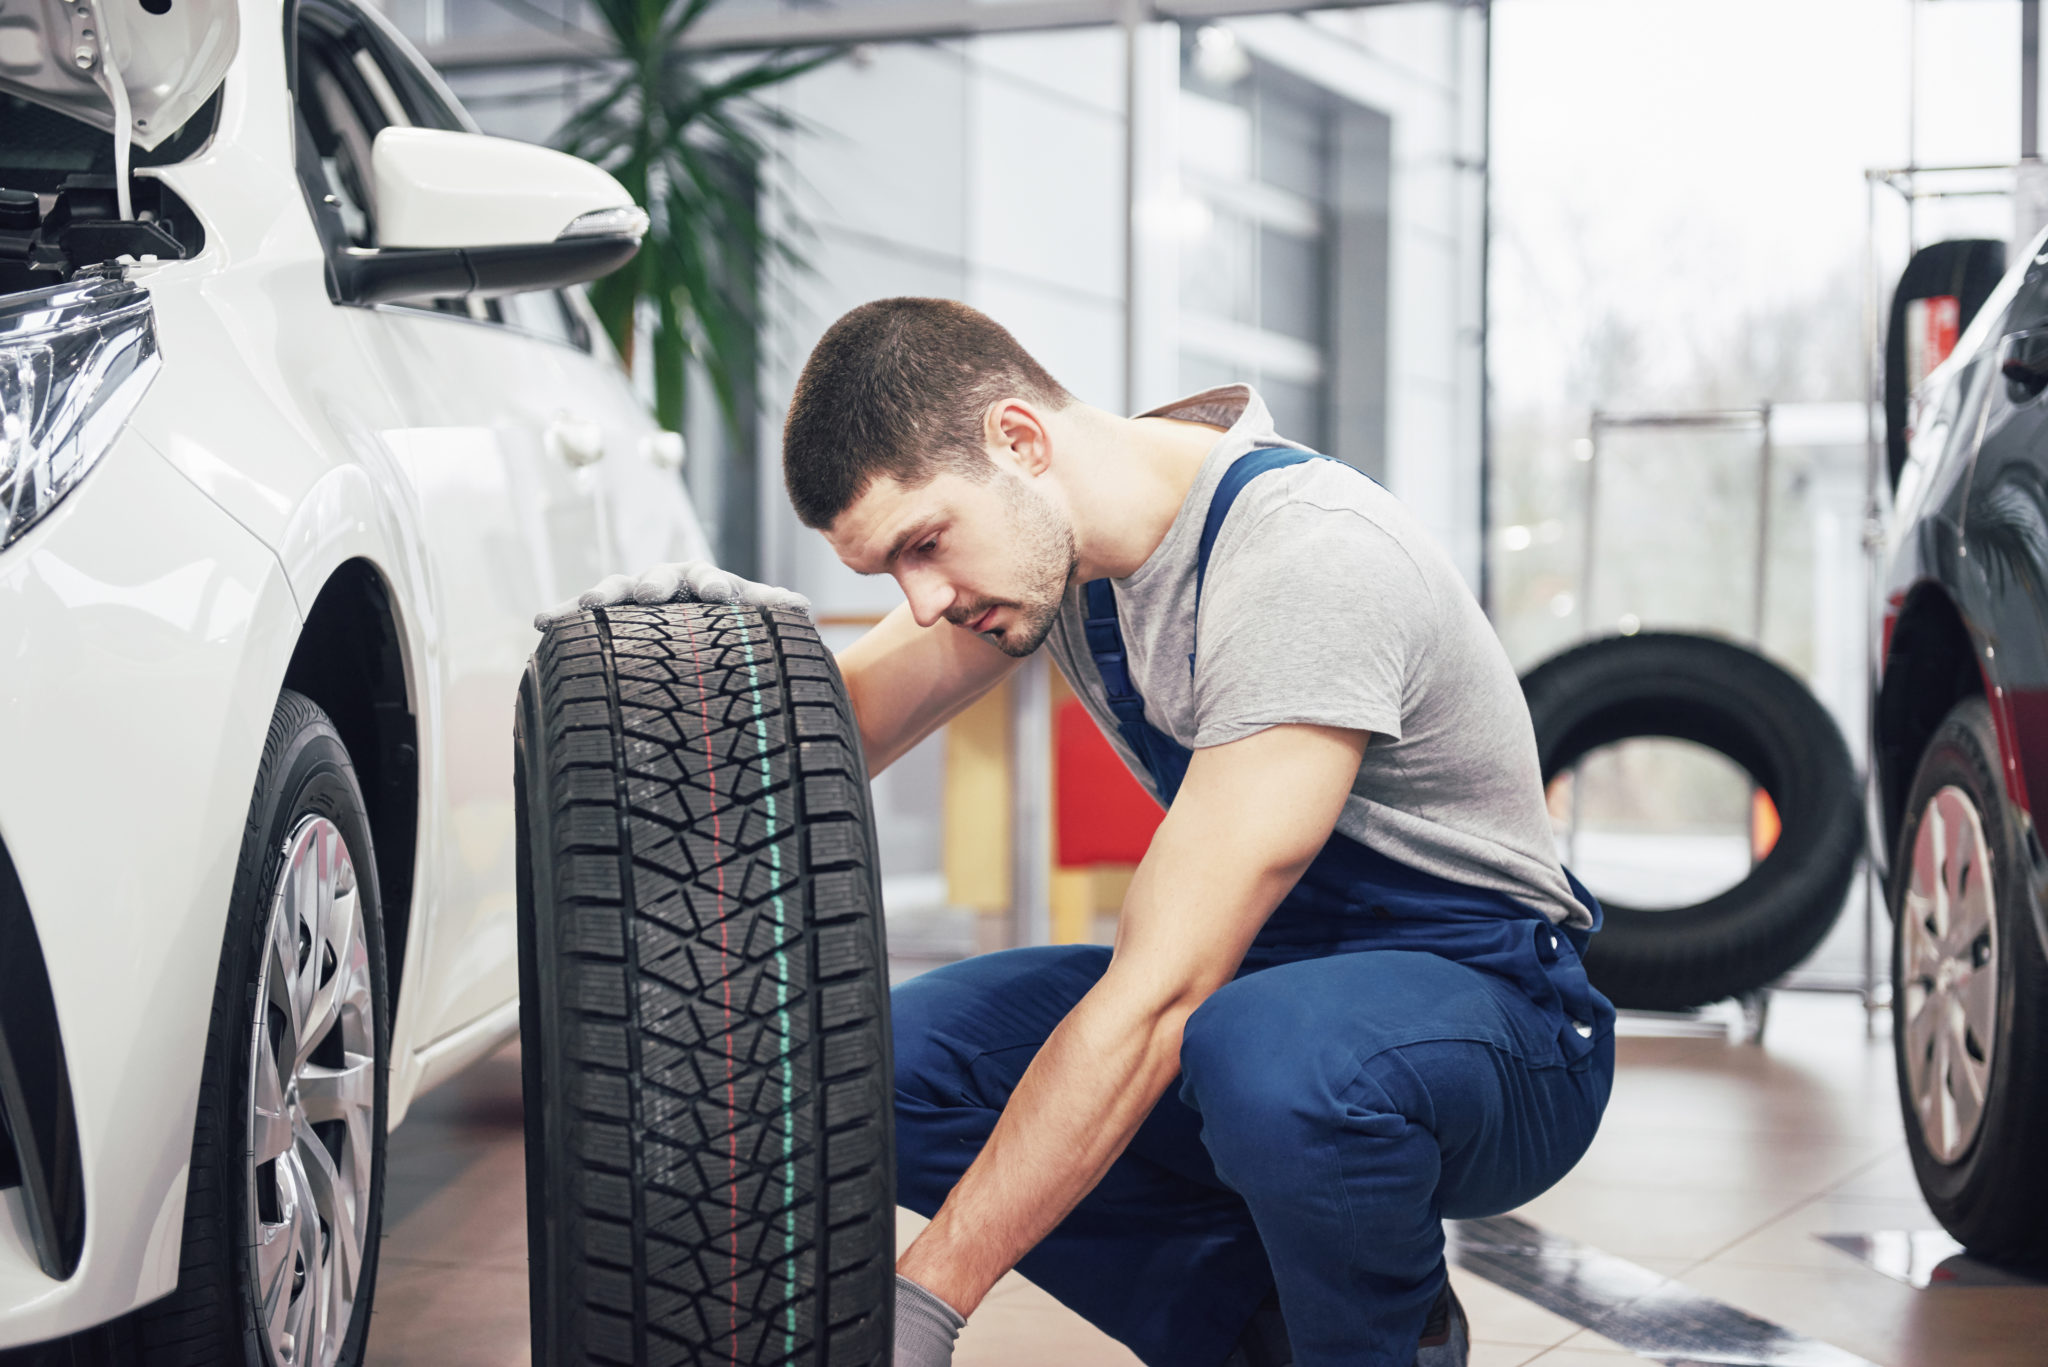 https://autolab.com.co/wp-content/uploads/2022/01/mechanic-holding-a-tire-tire-at-the-repair-garage-2021-08-29-02-45-20-utc-scaled.jpg